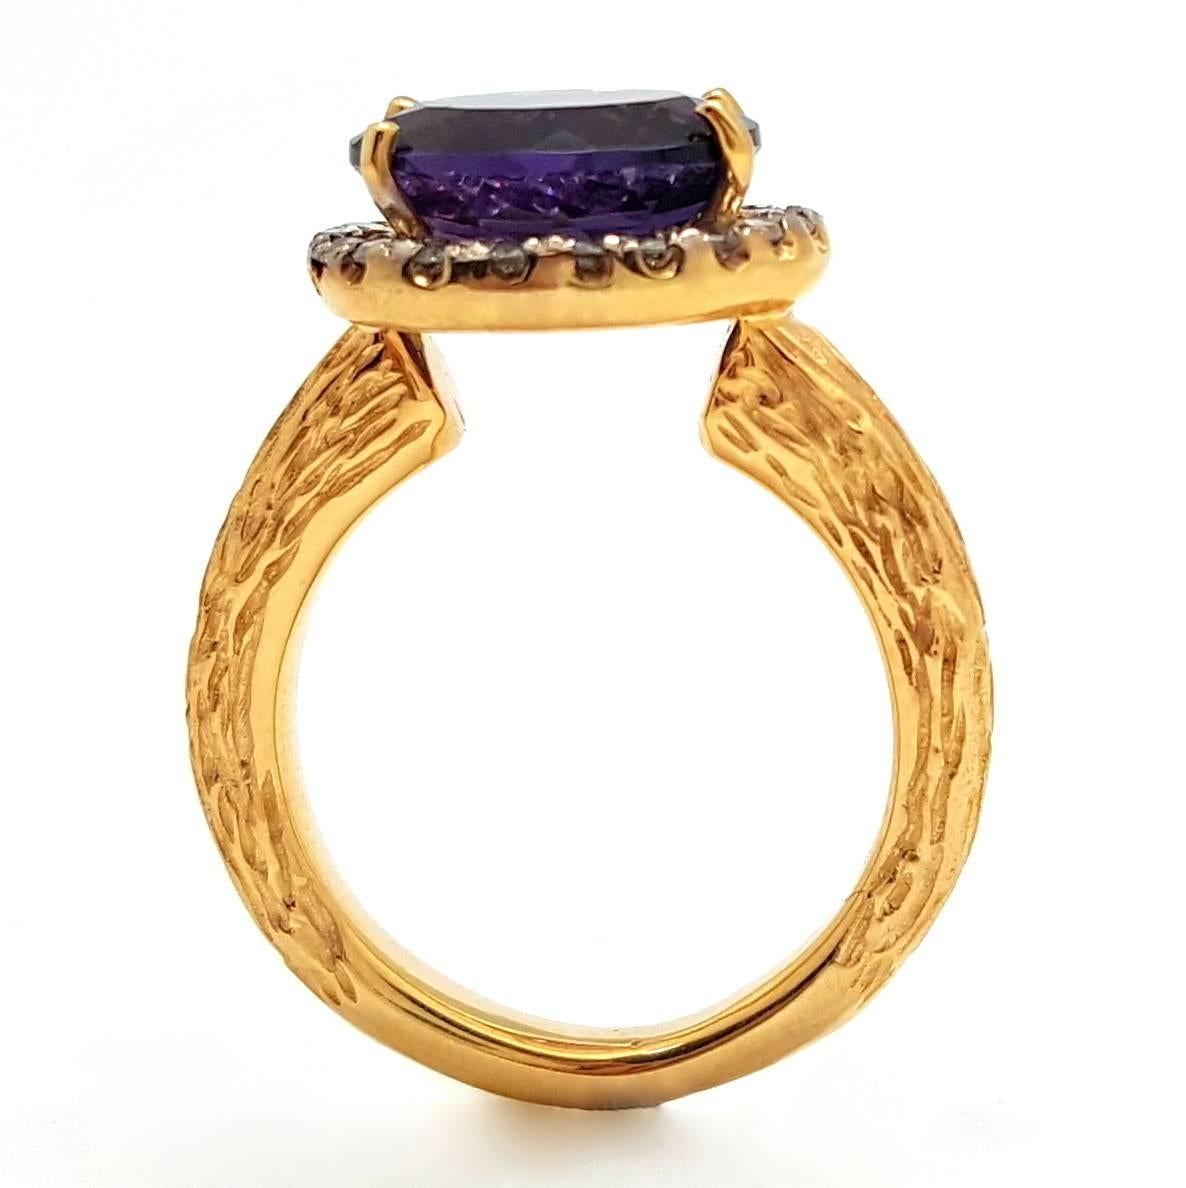 14k Yellow Gold, 2.98ct Oval-Cut Siberian Amethyst & Diamond Halo Ring For Sale 1